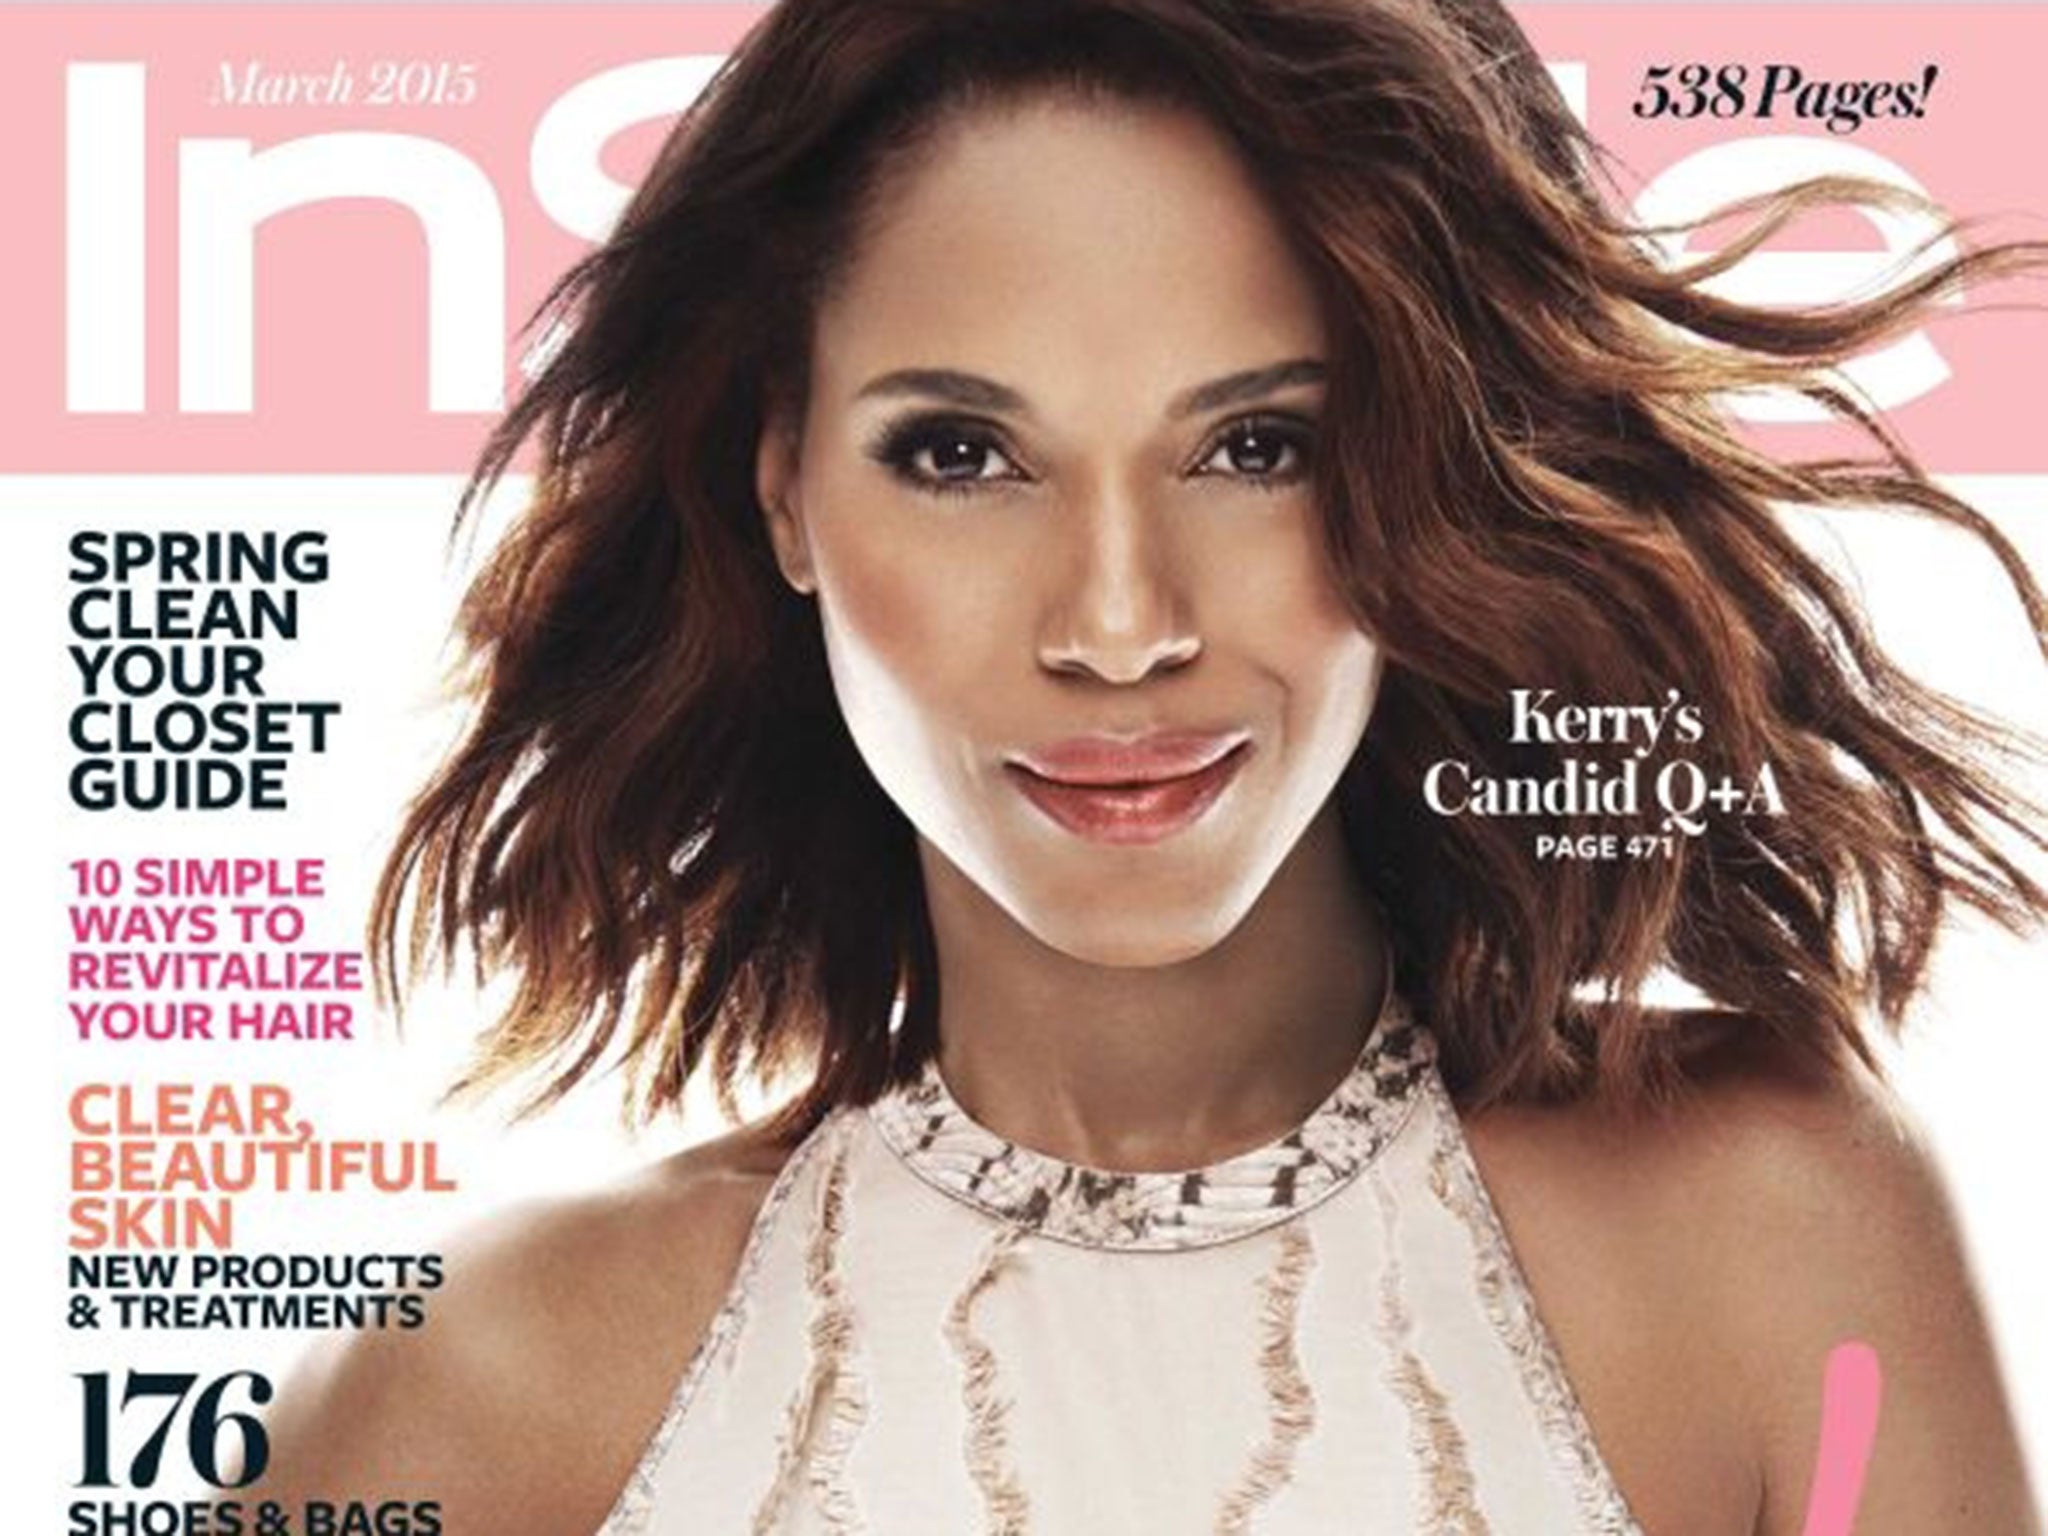 Actress Kerry Washington appears on the cover of the March 2015 issue.